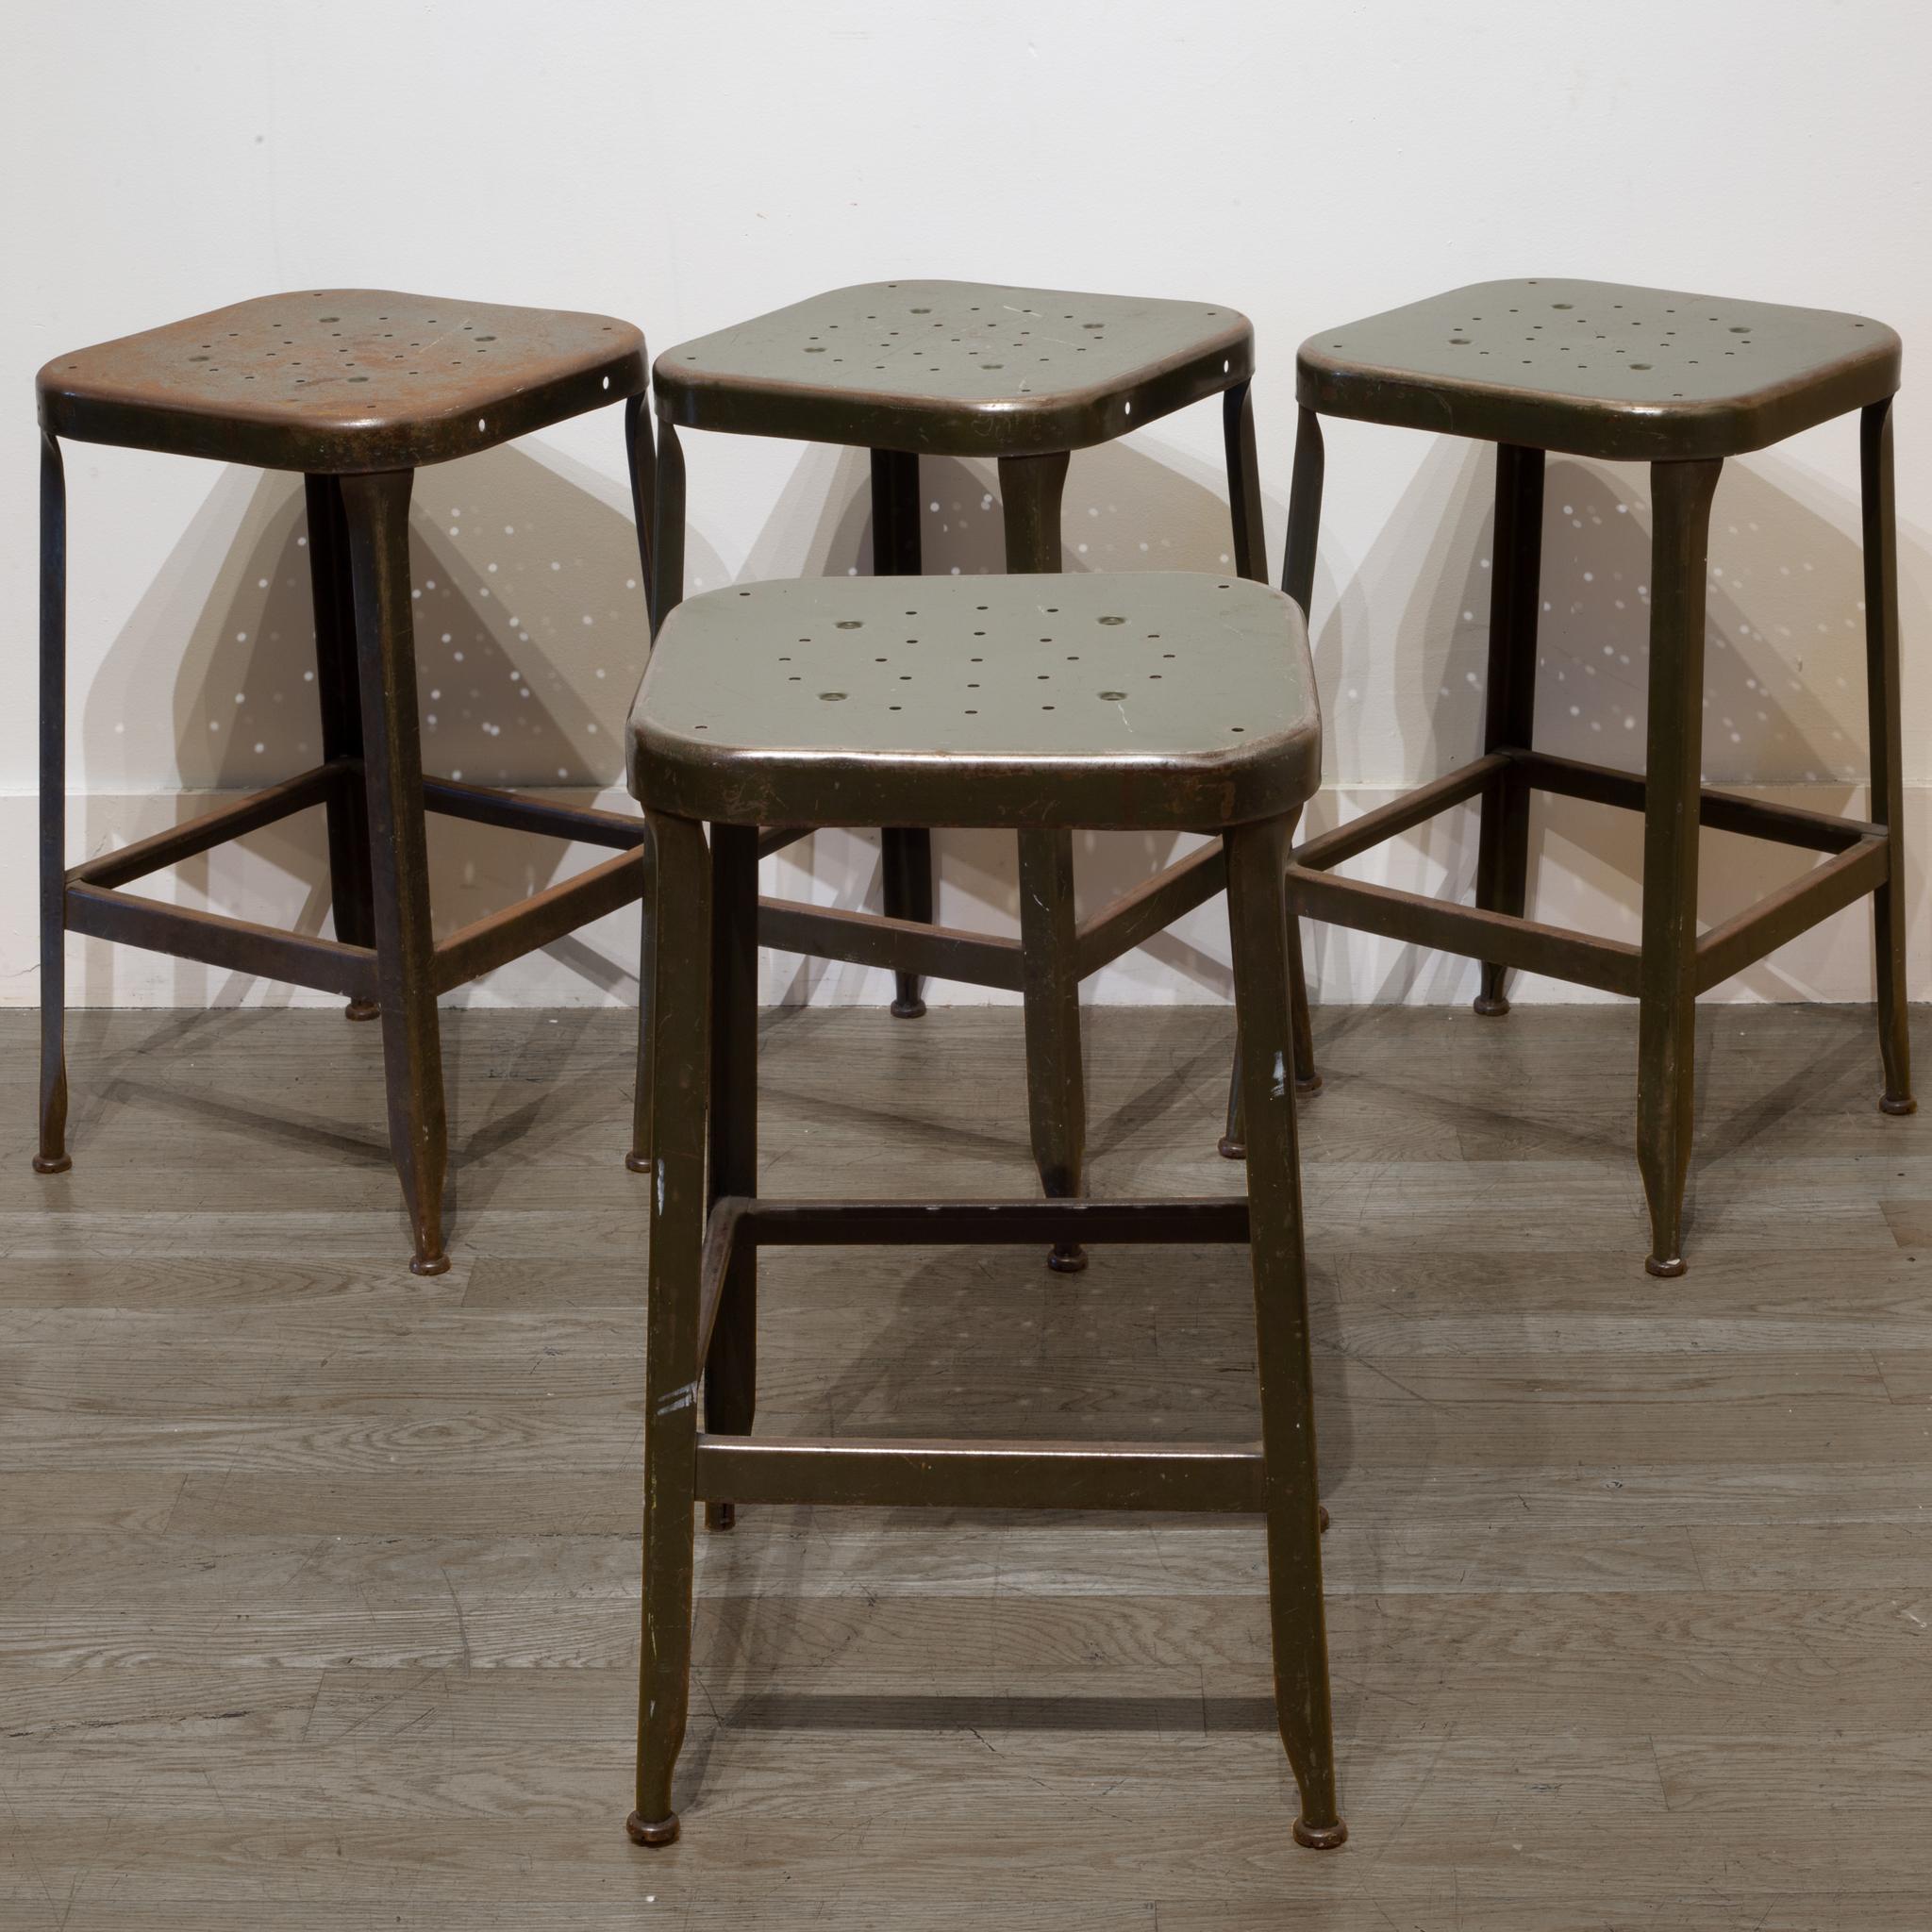 ABOUT

Price is per stool.

These are pressed and folded steel factory stools. They have retained much of their original finish and are sturdy and structurally sound.

 CREATOR Unknown.
 DATE OF MANUFACTURE c.1930.
 MATERIALS AND TECHNIQUES